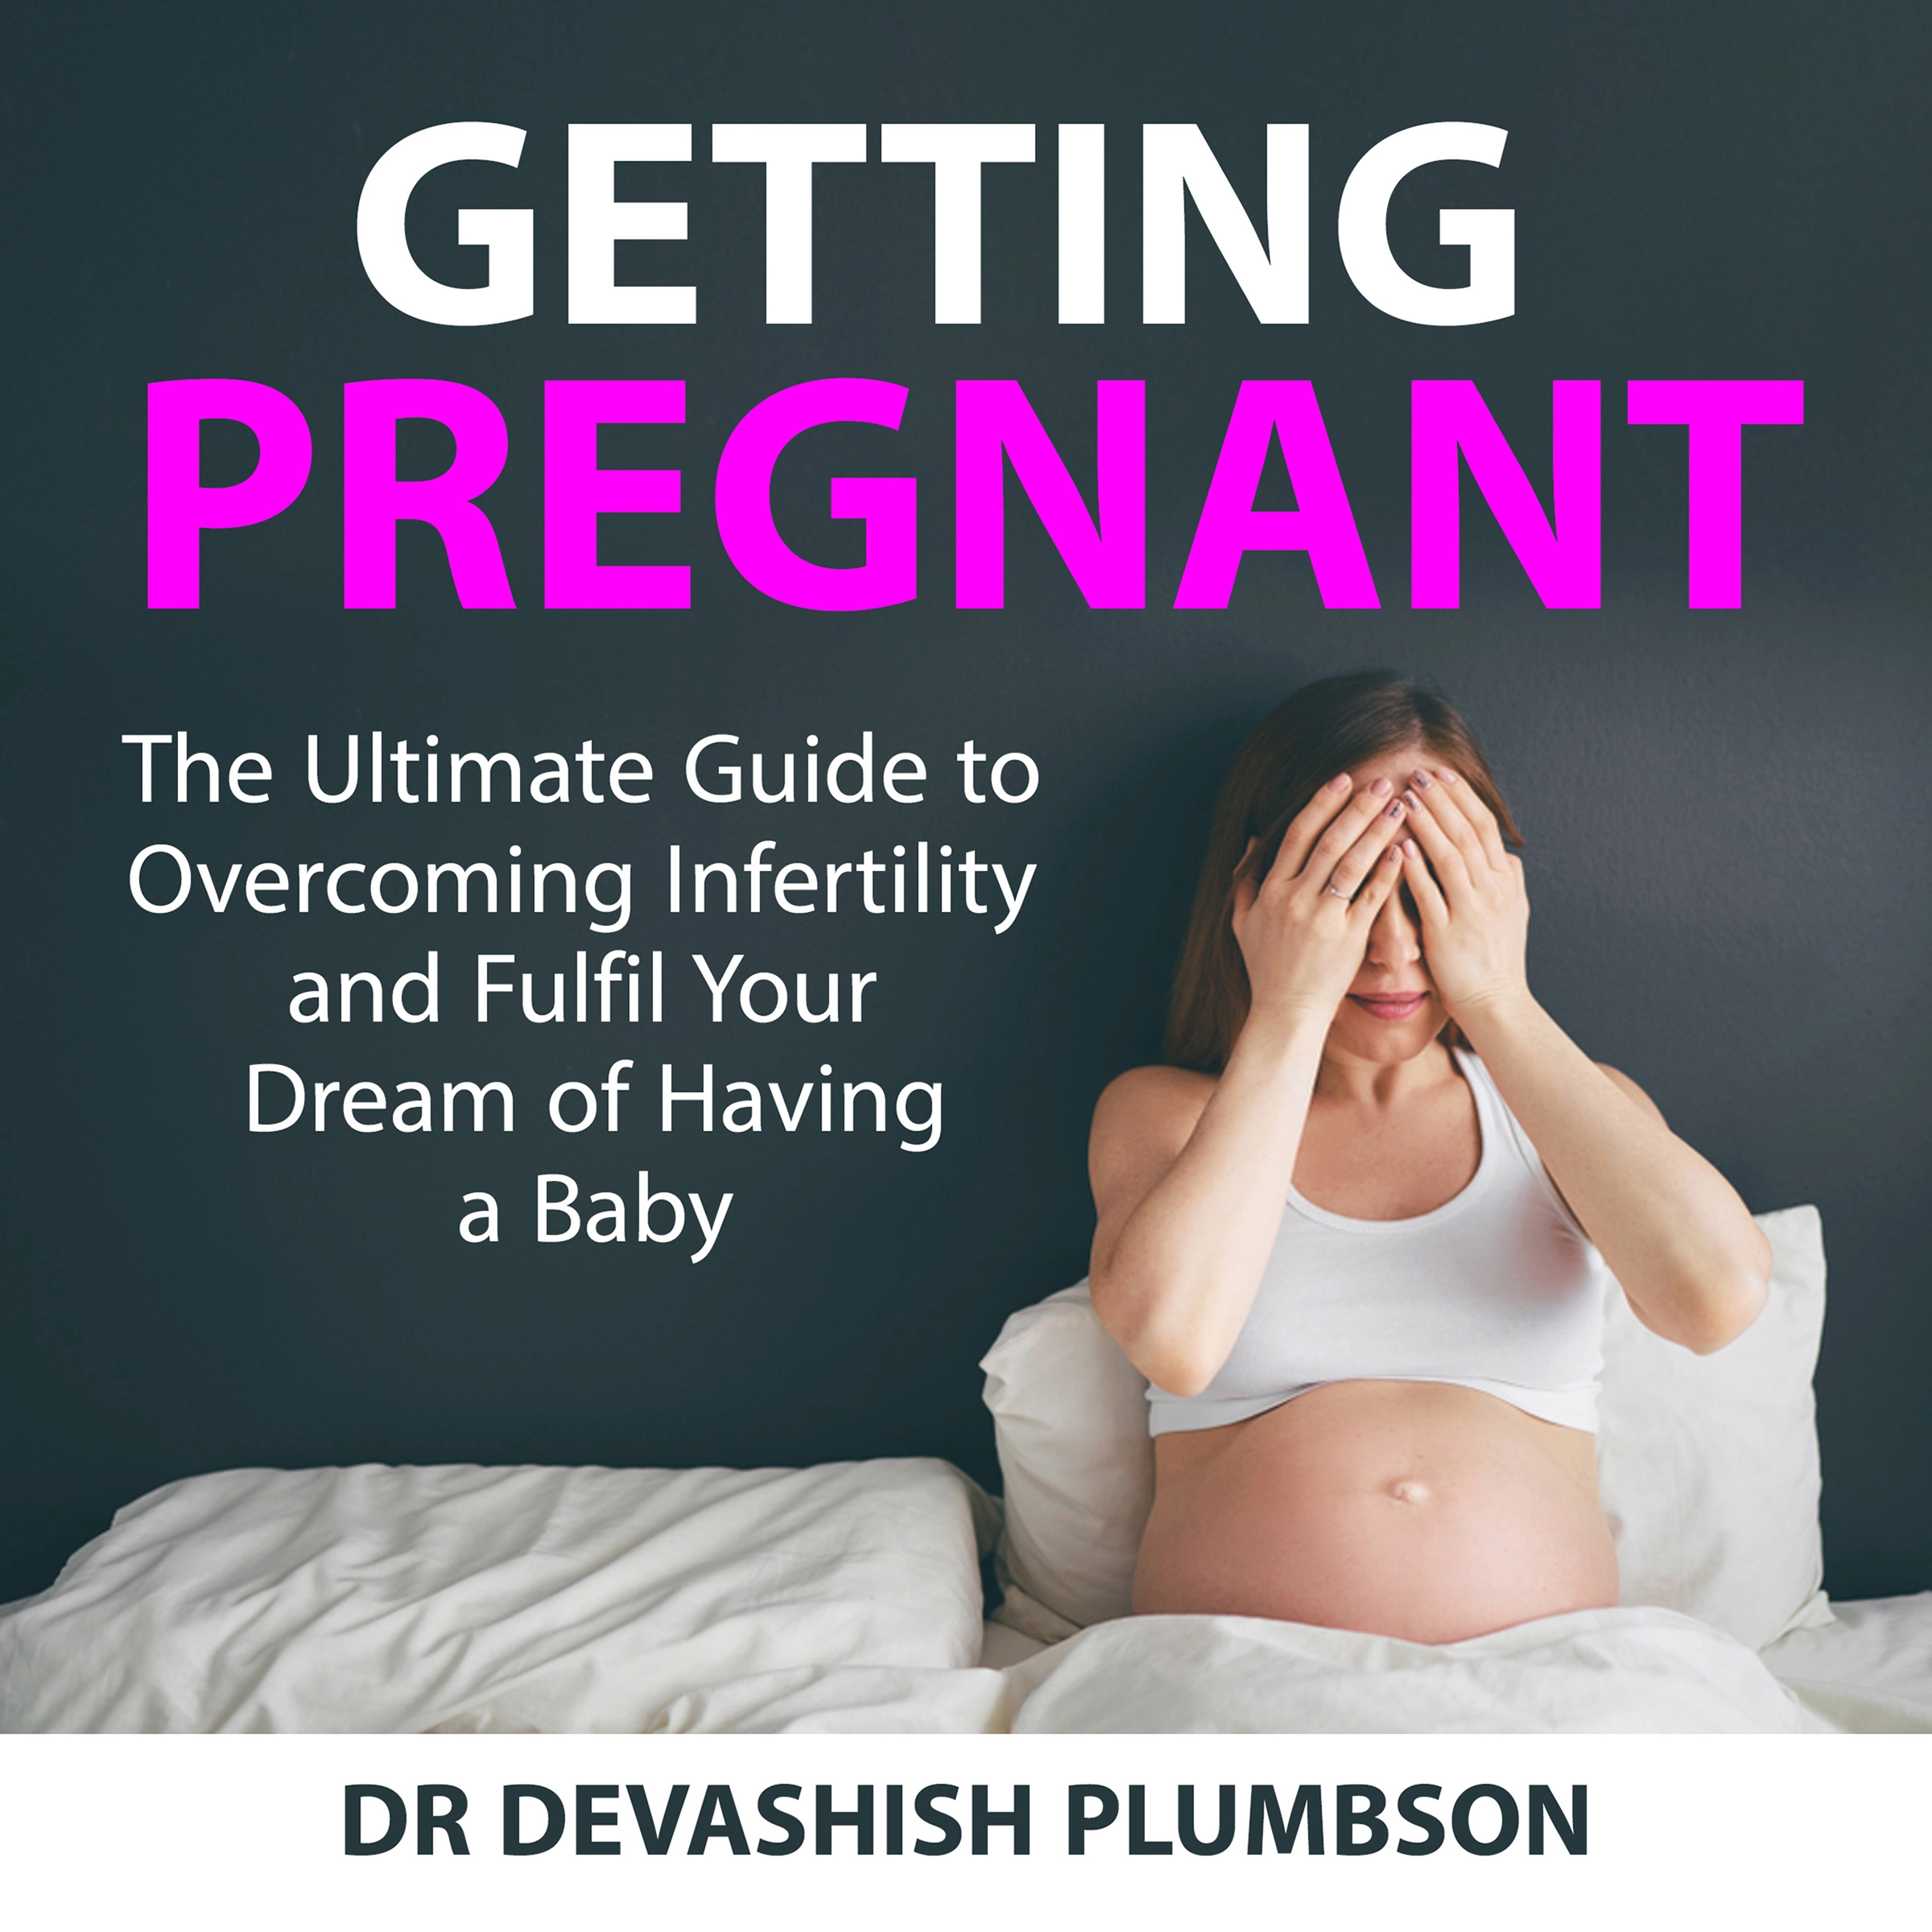 Getting Pregnant Audiobook by Dr Devashish Plumbson